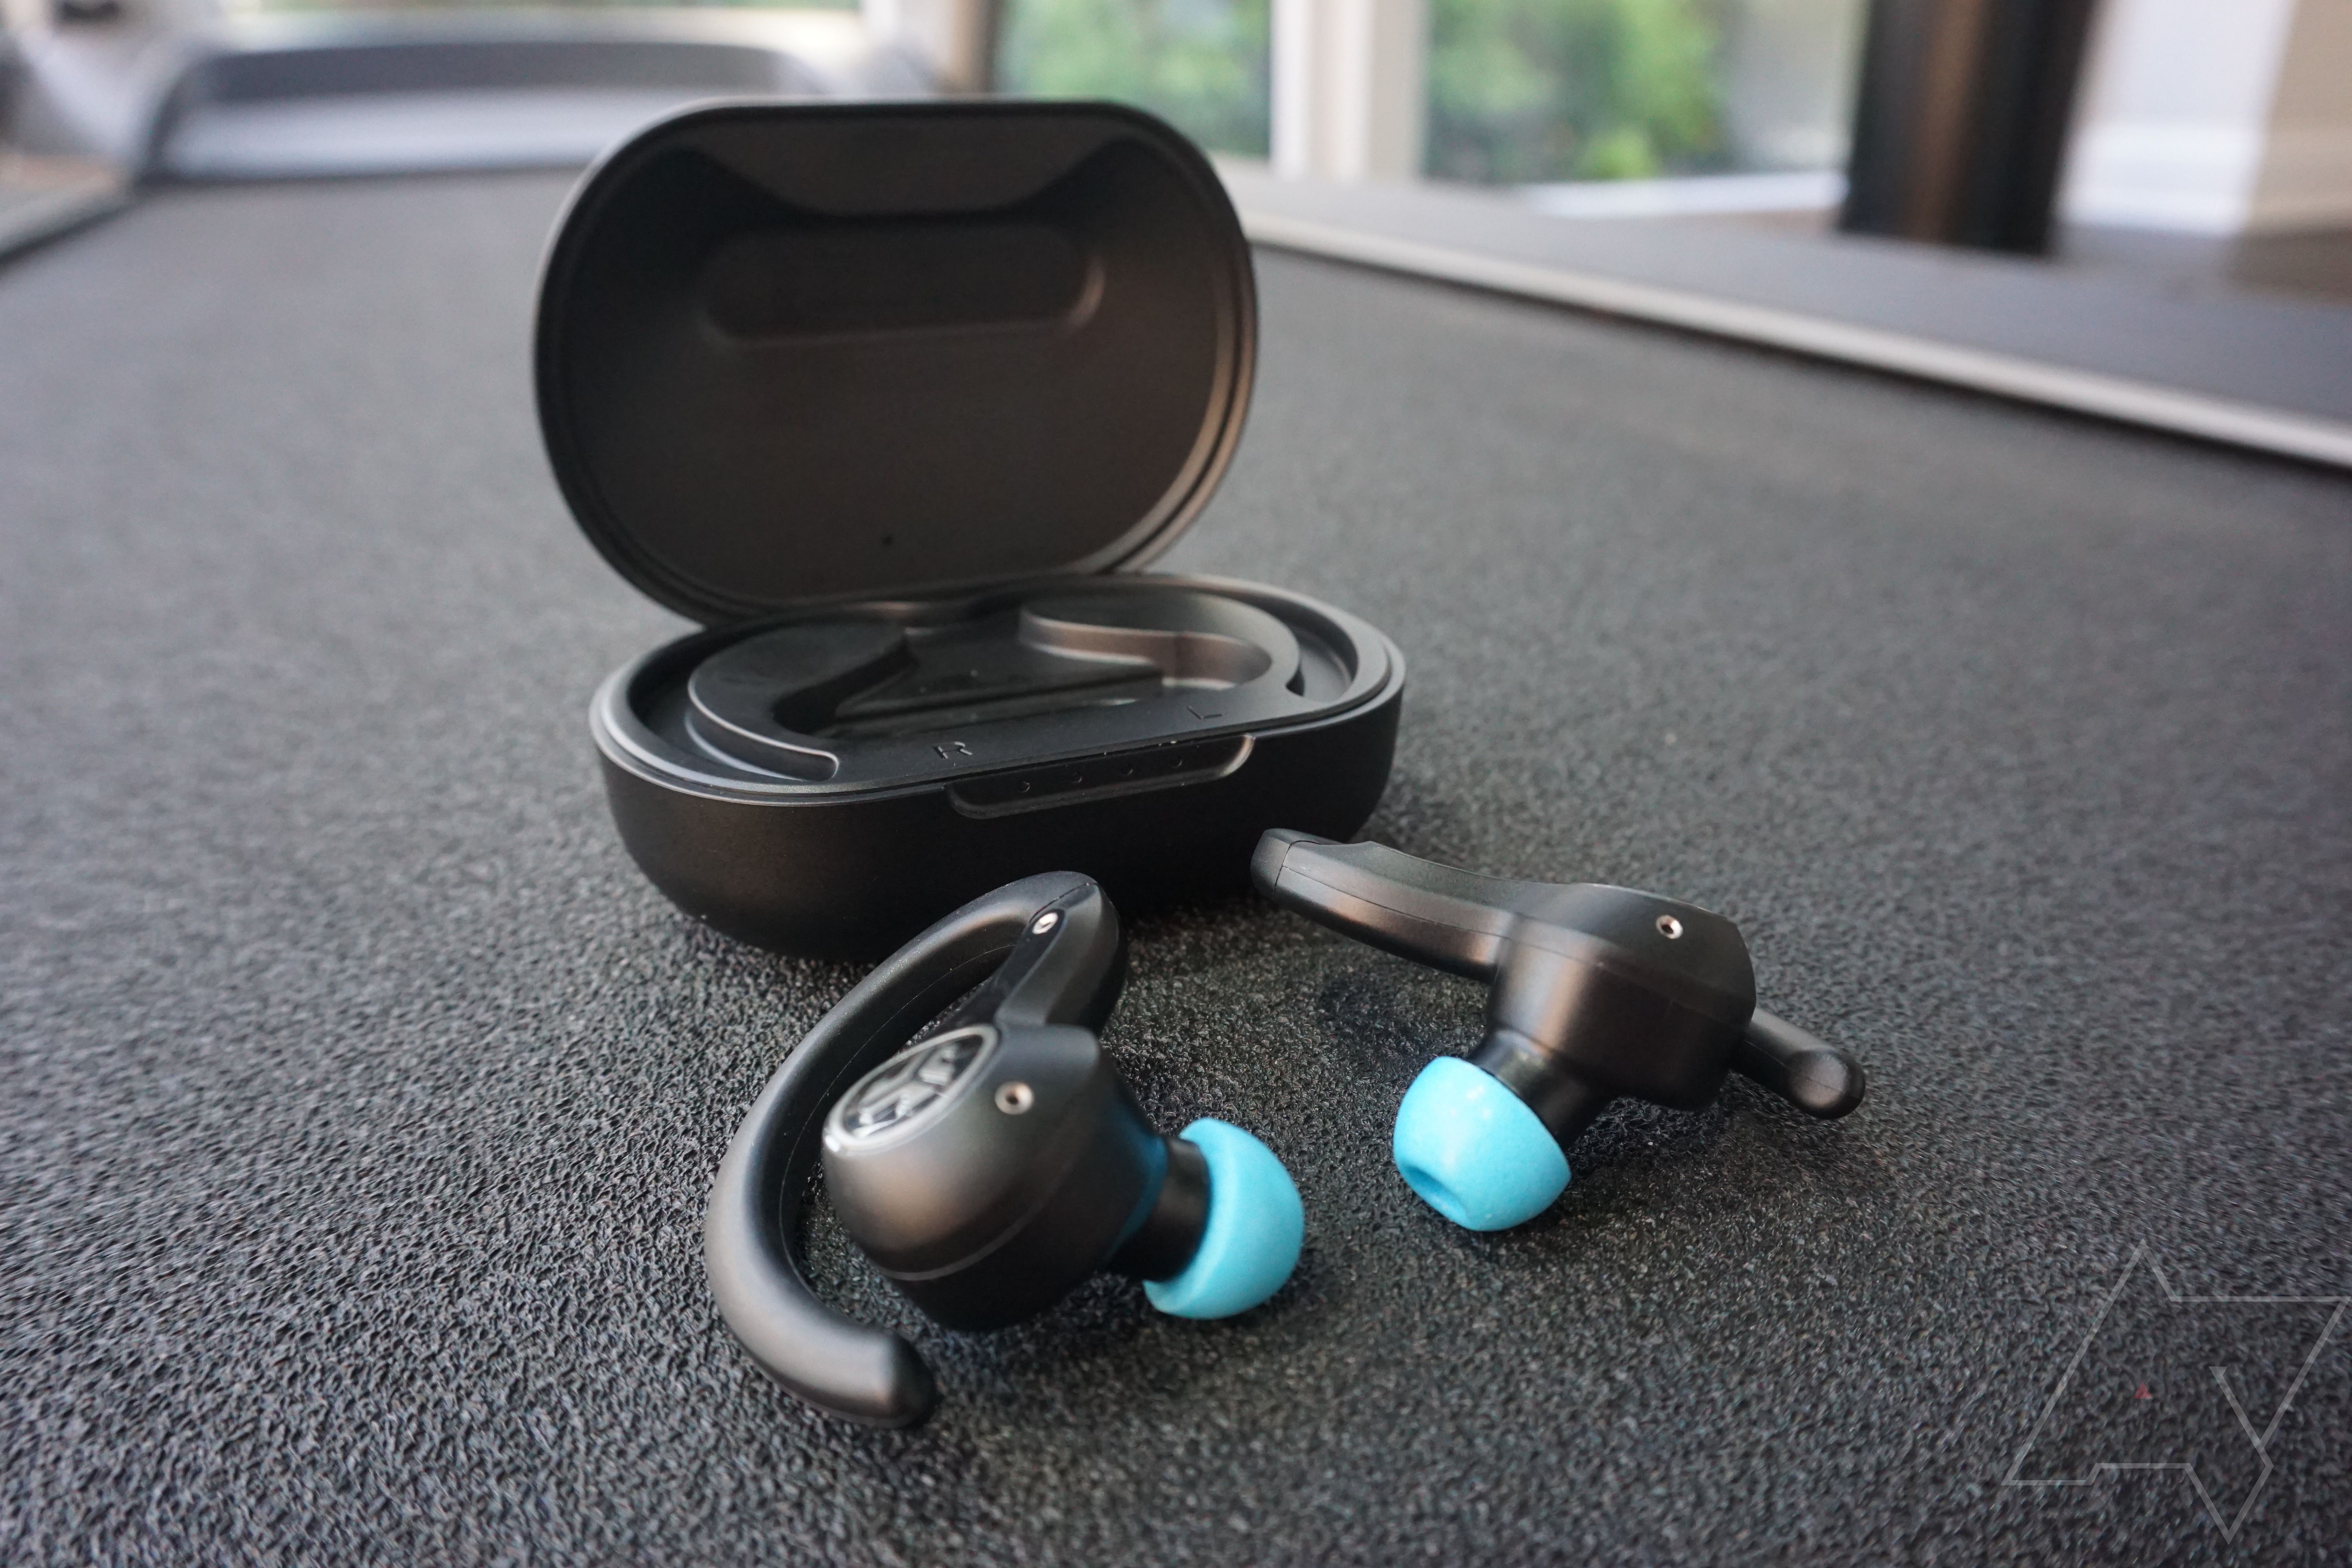 The JLab Epic Air Sport earbuds in front of the case